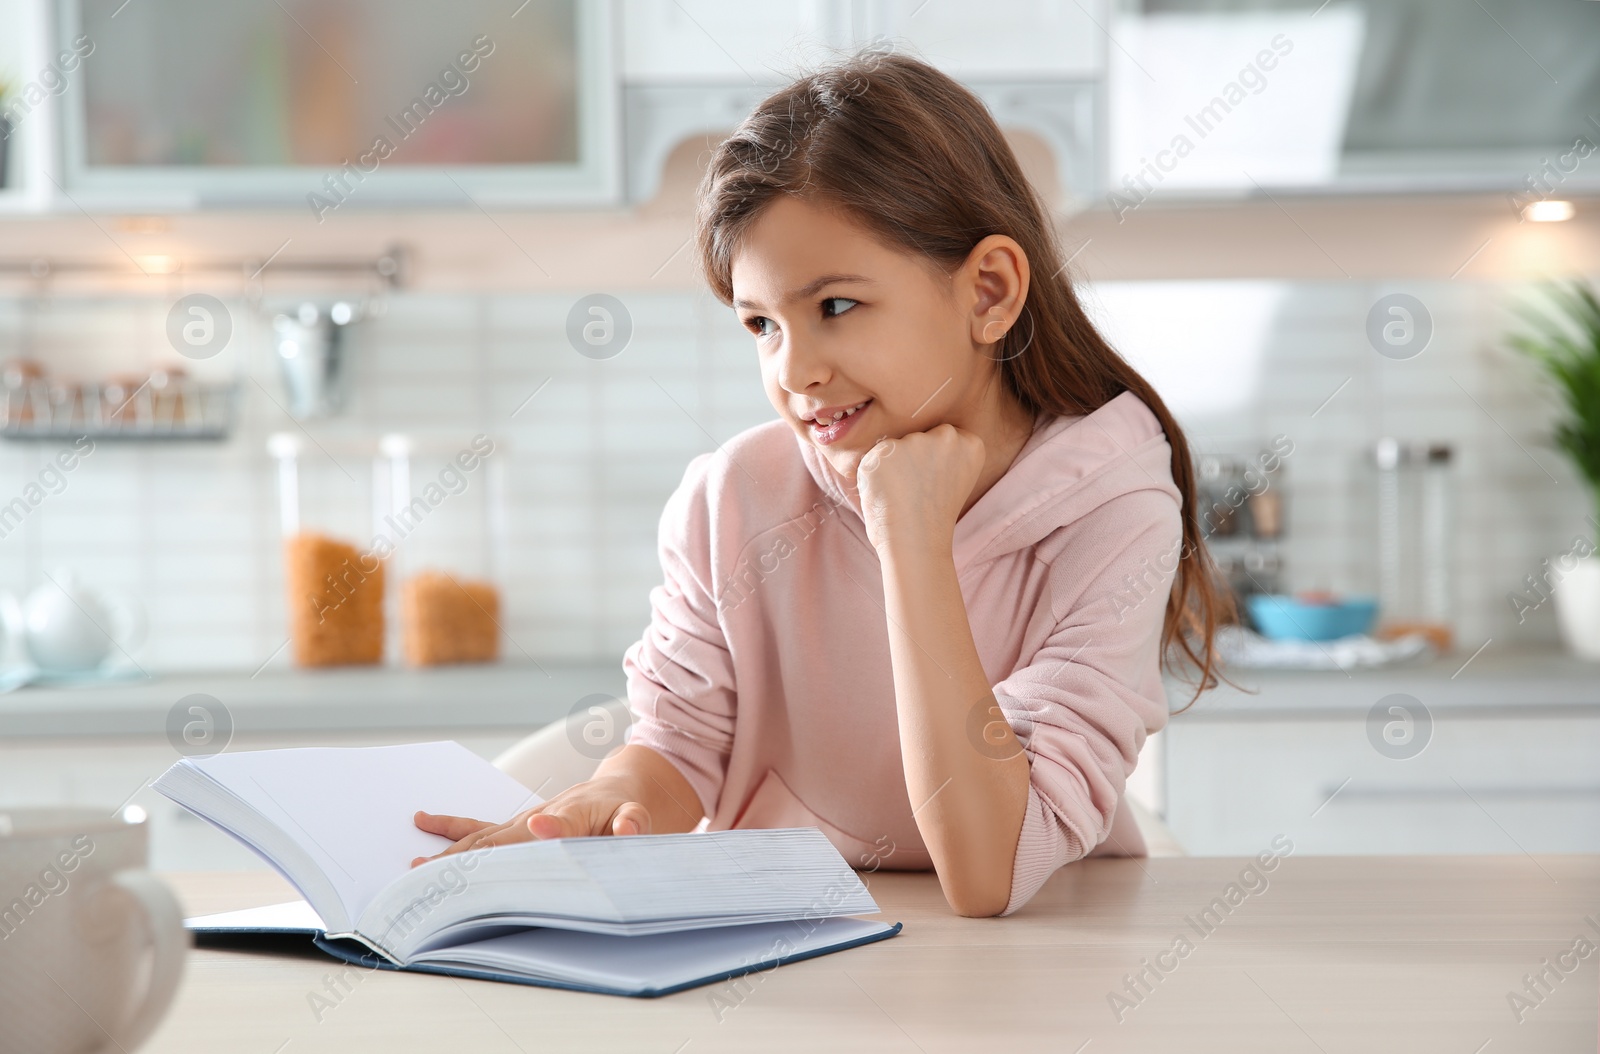 Photo of Cute little girl reading book at table in kitchen